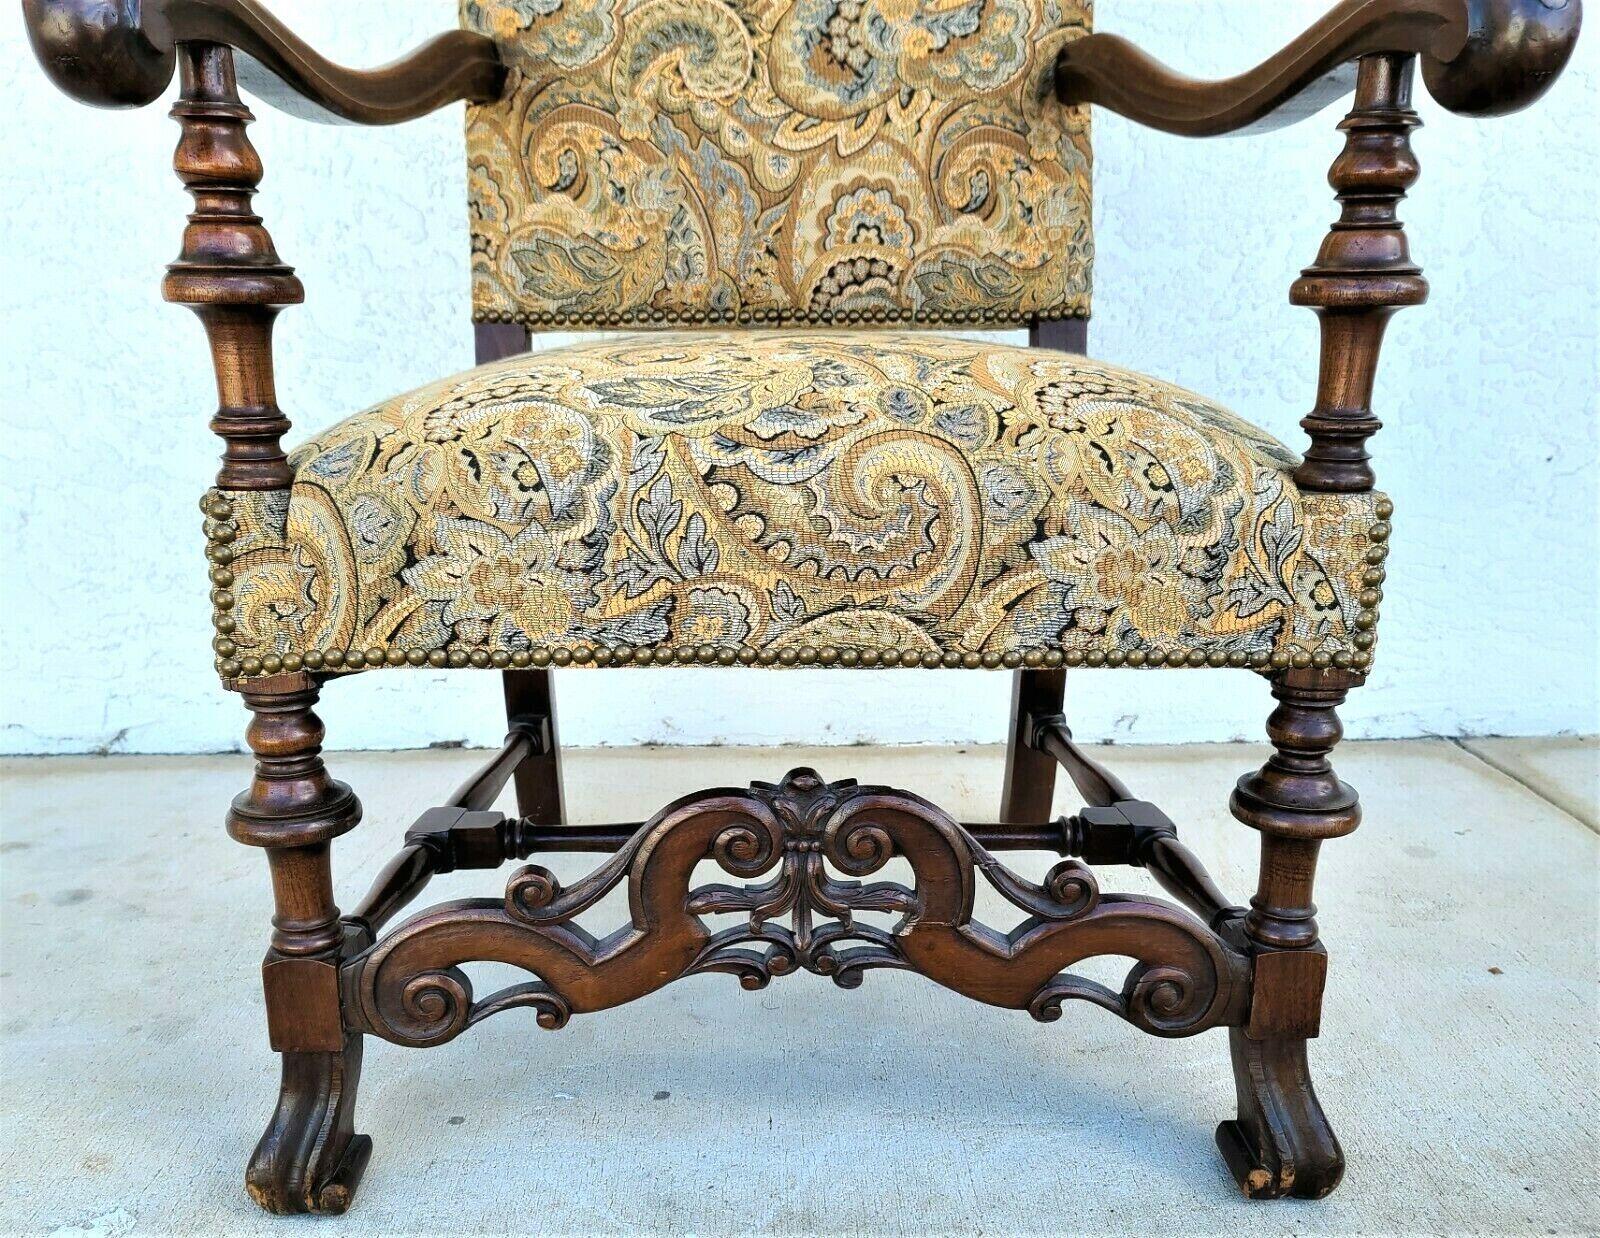 Unknown Antique Italian Renaissance Revival Style Carved Walnut Throne Chair For Sale